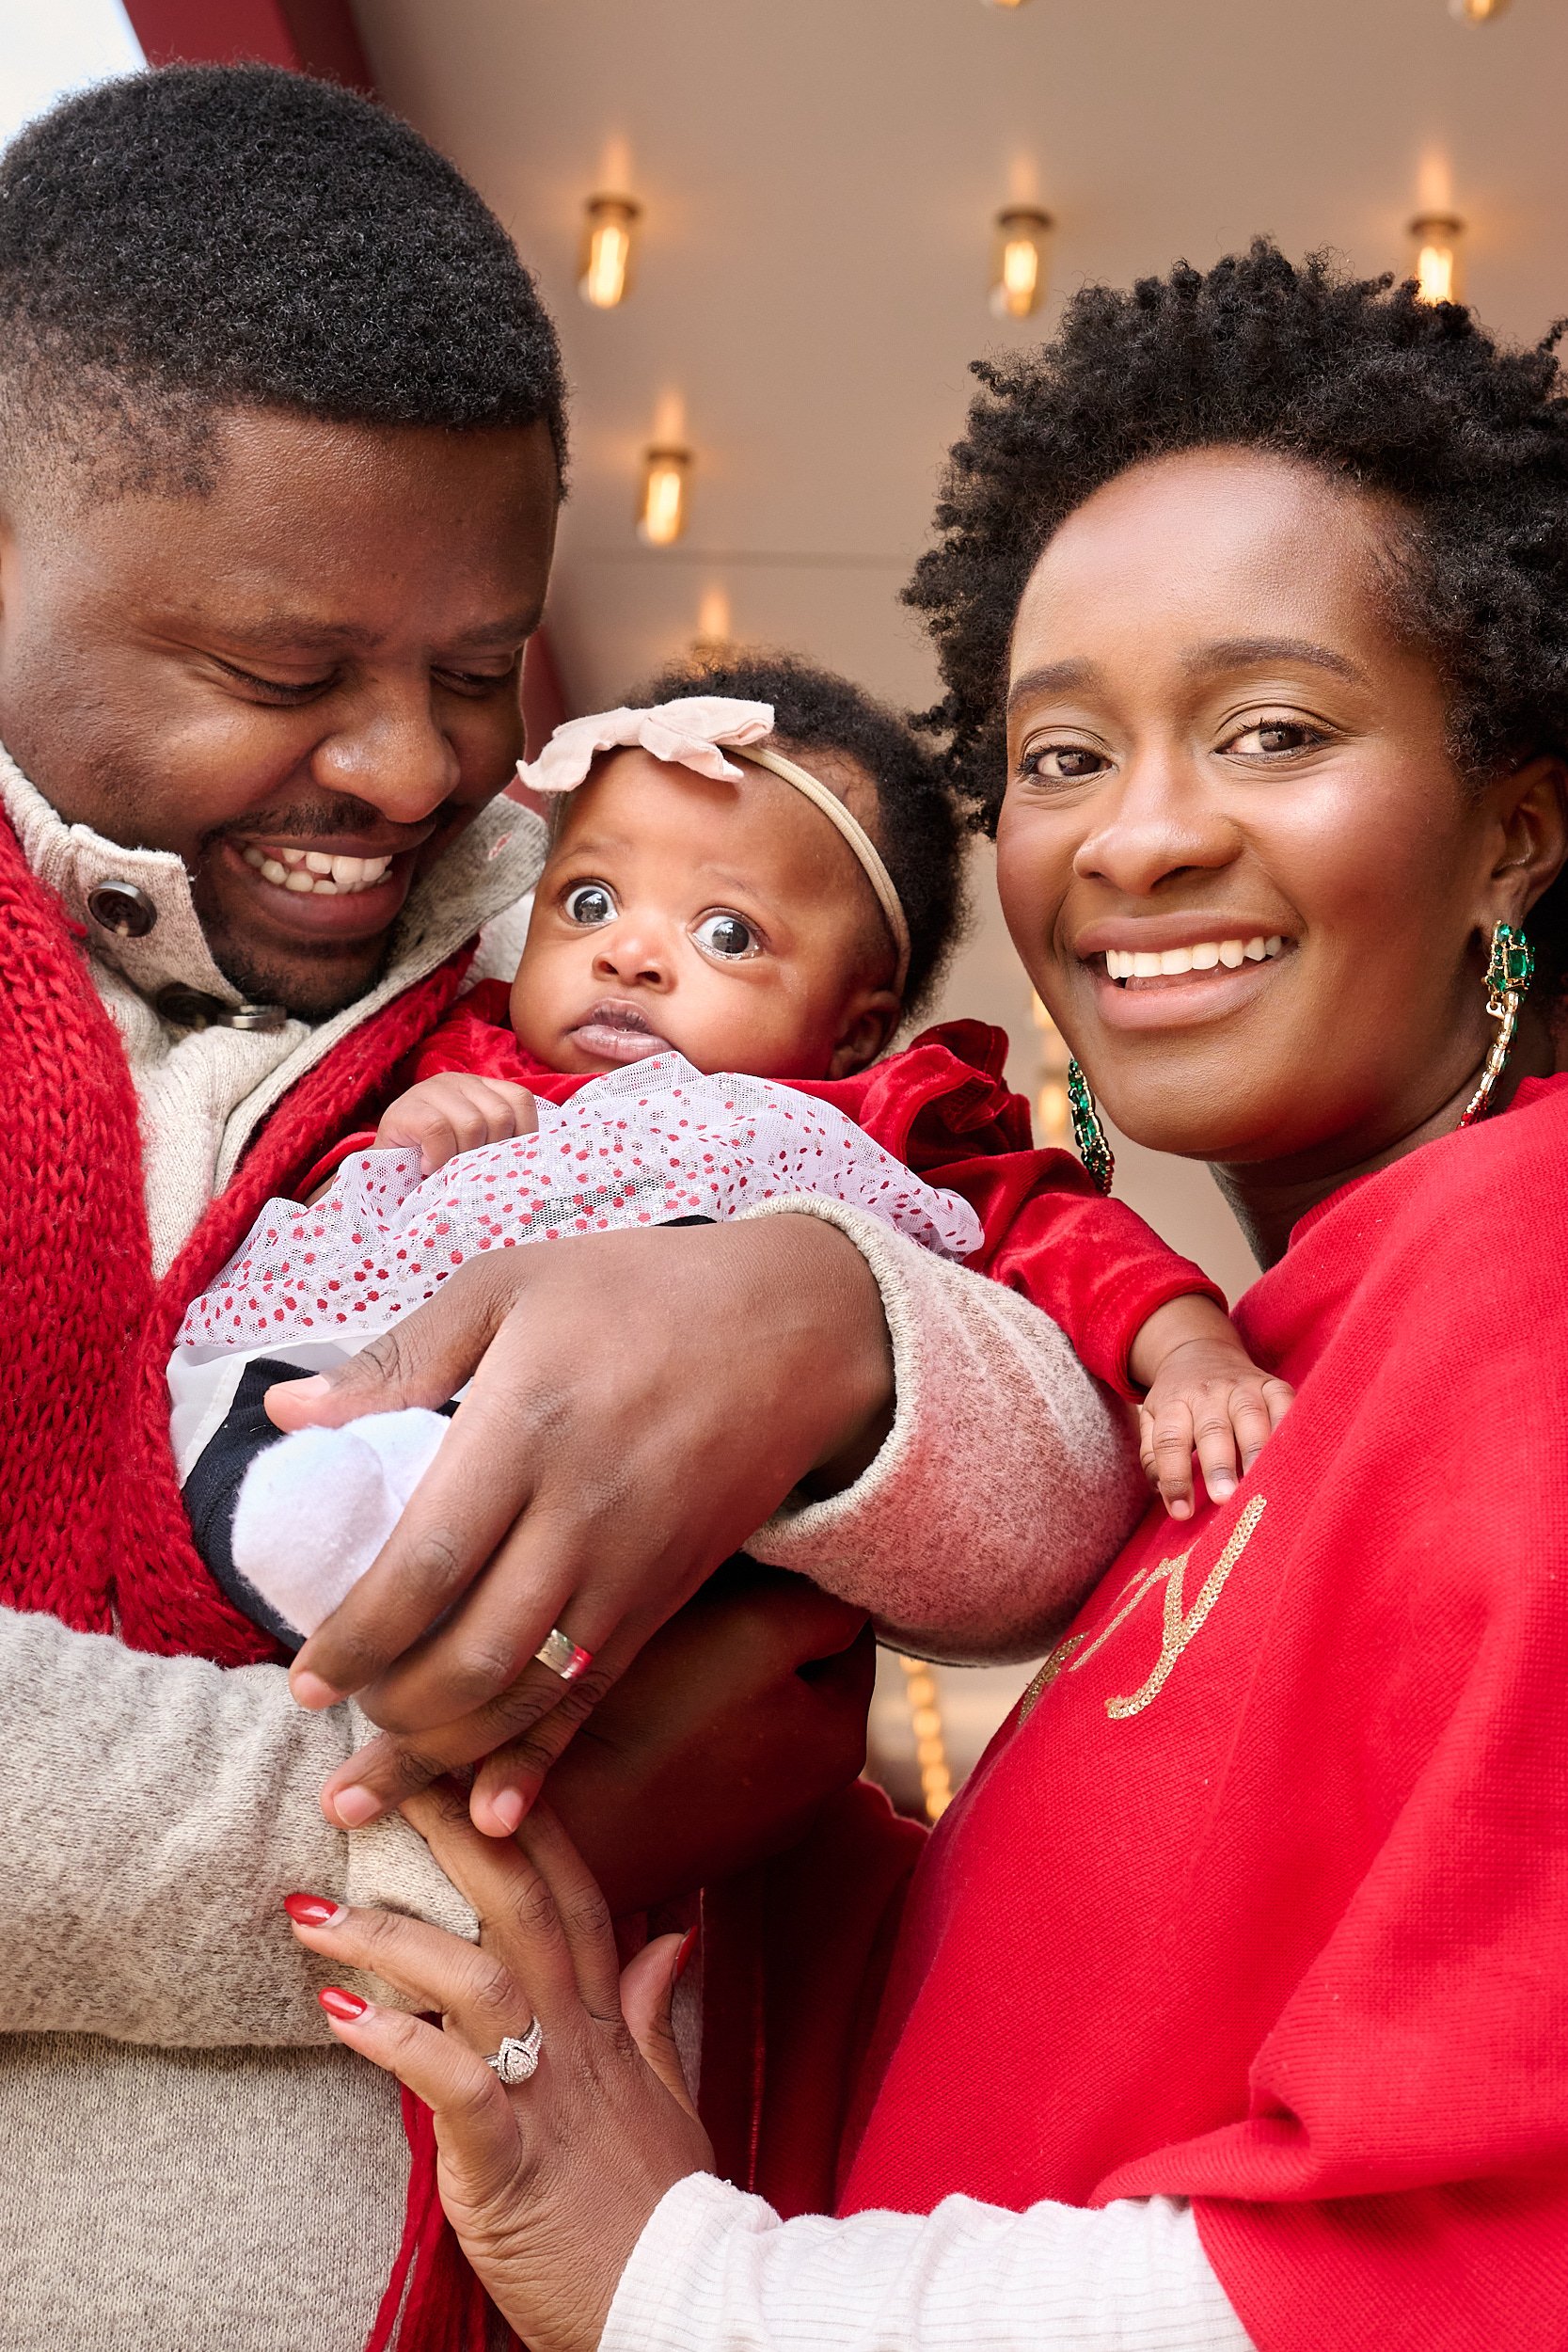  THE WOODLANDS, TEXAS - DECEMBER 2022: Deionfia Neza is posing for Christmas card portraits with her newborn daughter and her husband. The infant and her young parents are dressed in red and look happ 